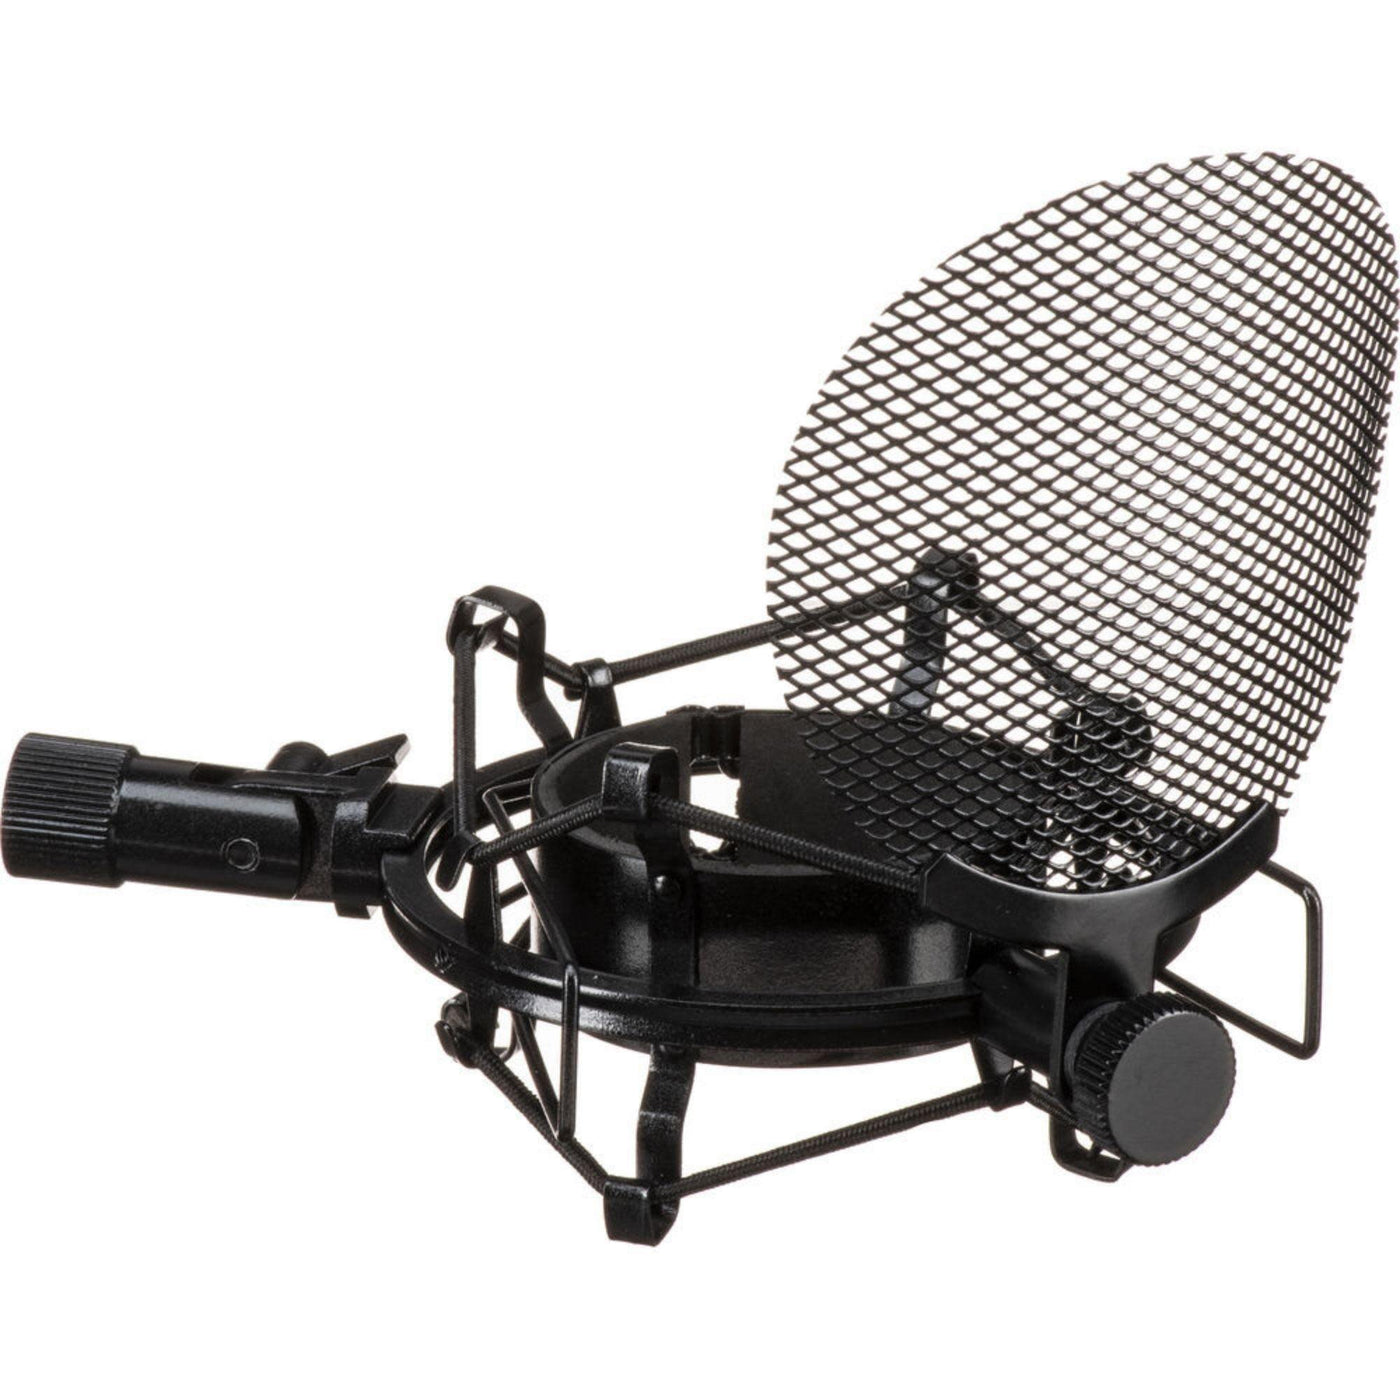 MXL SMP-1 Shock Mount with Built-in Pop Filter for MXL 770 and 990 Microphone Models